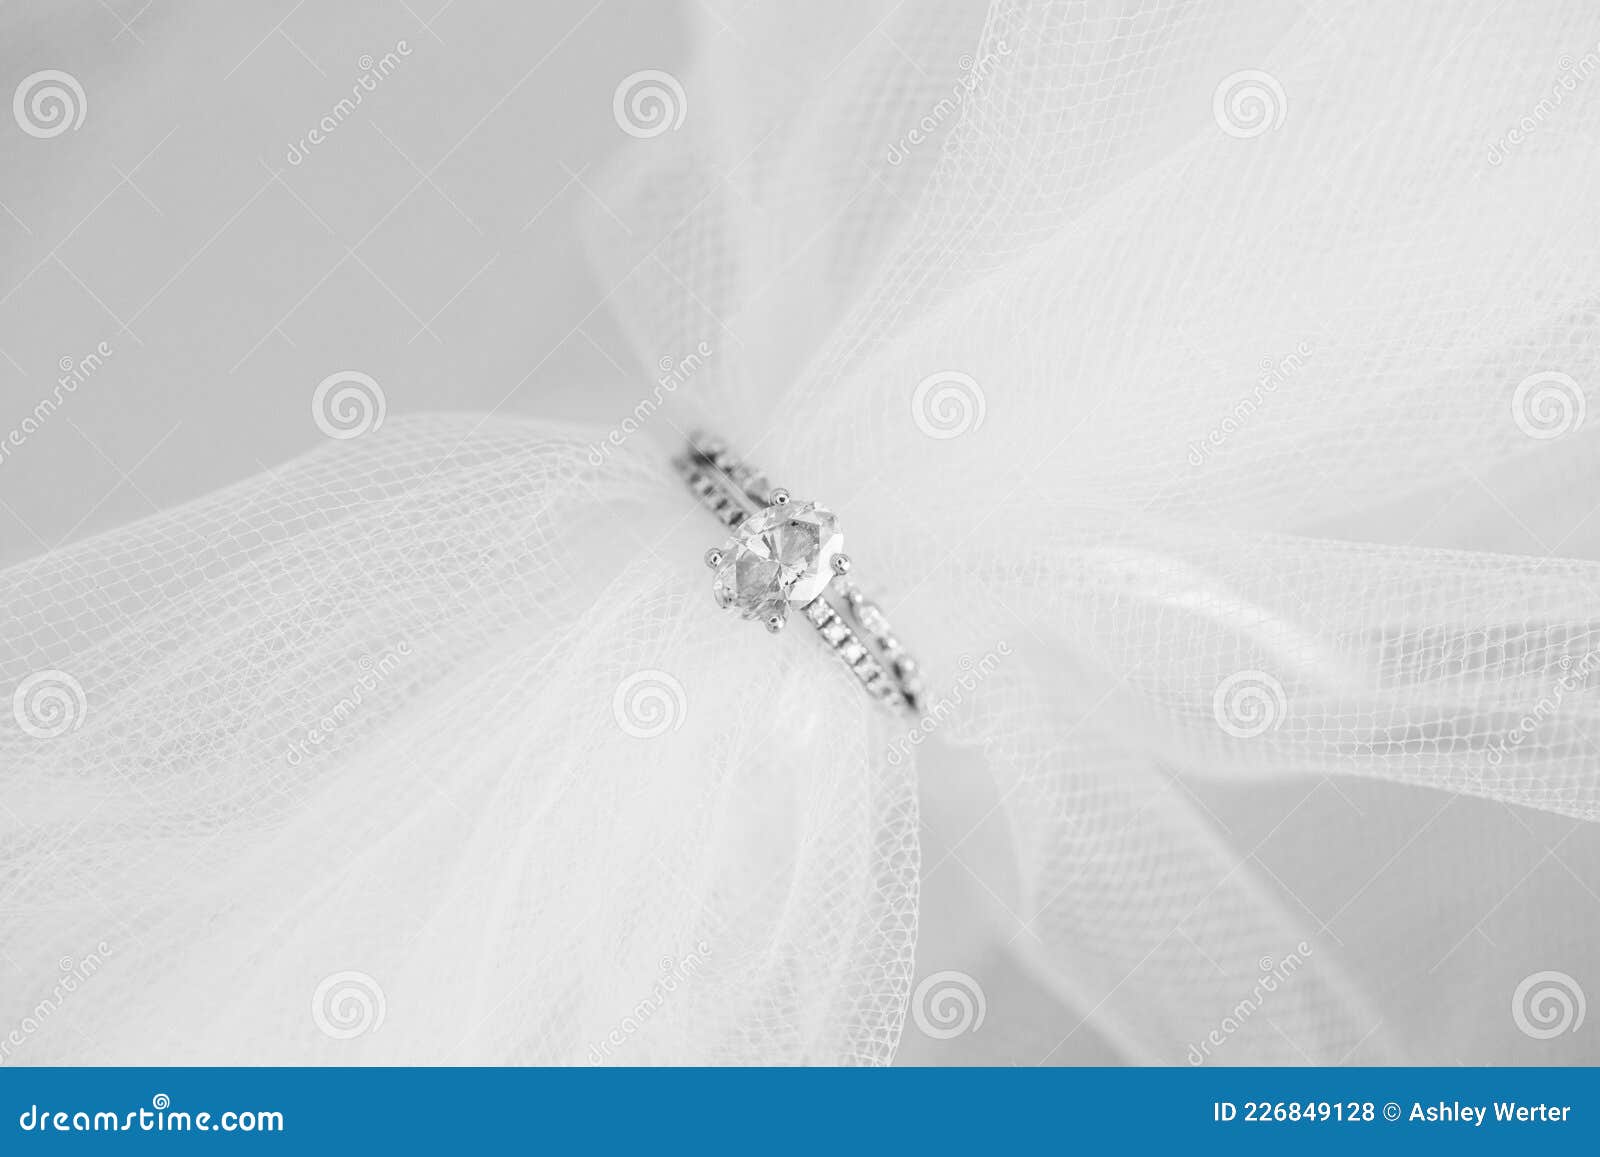 details of wedding jewelry and accessories